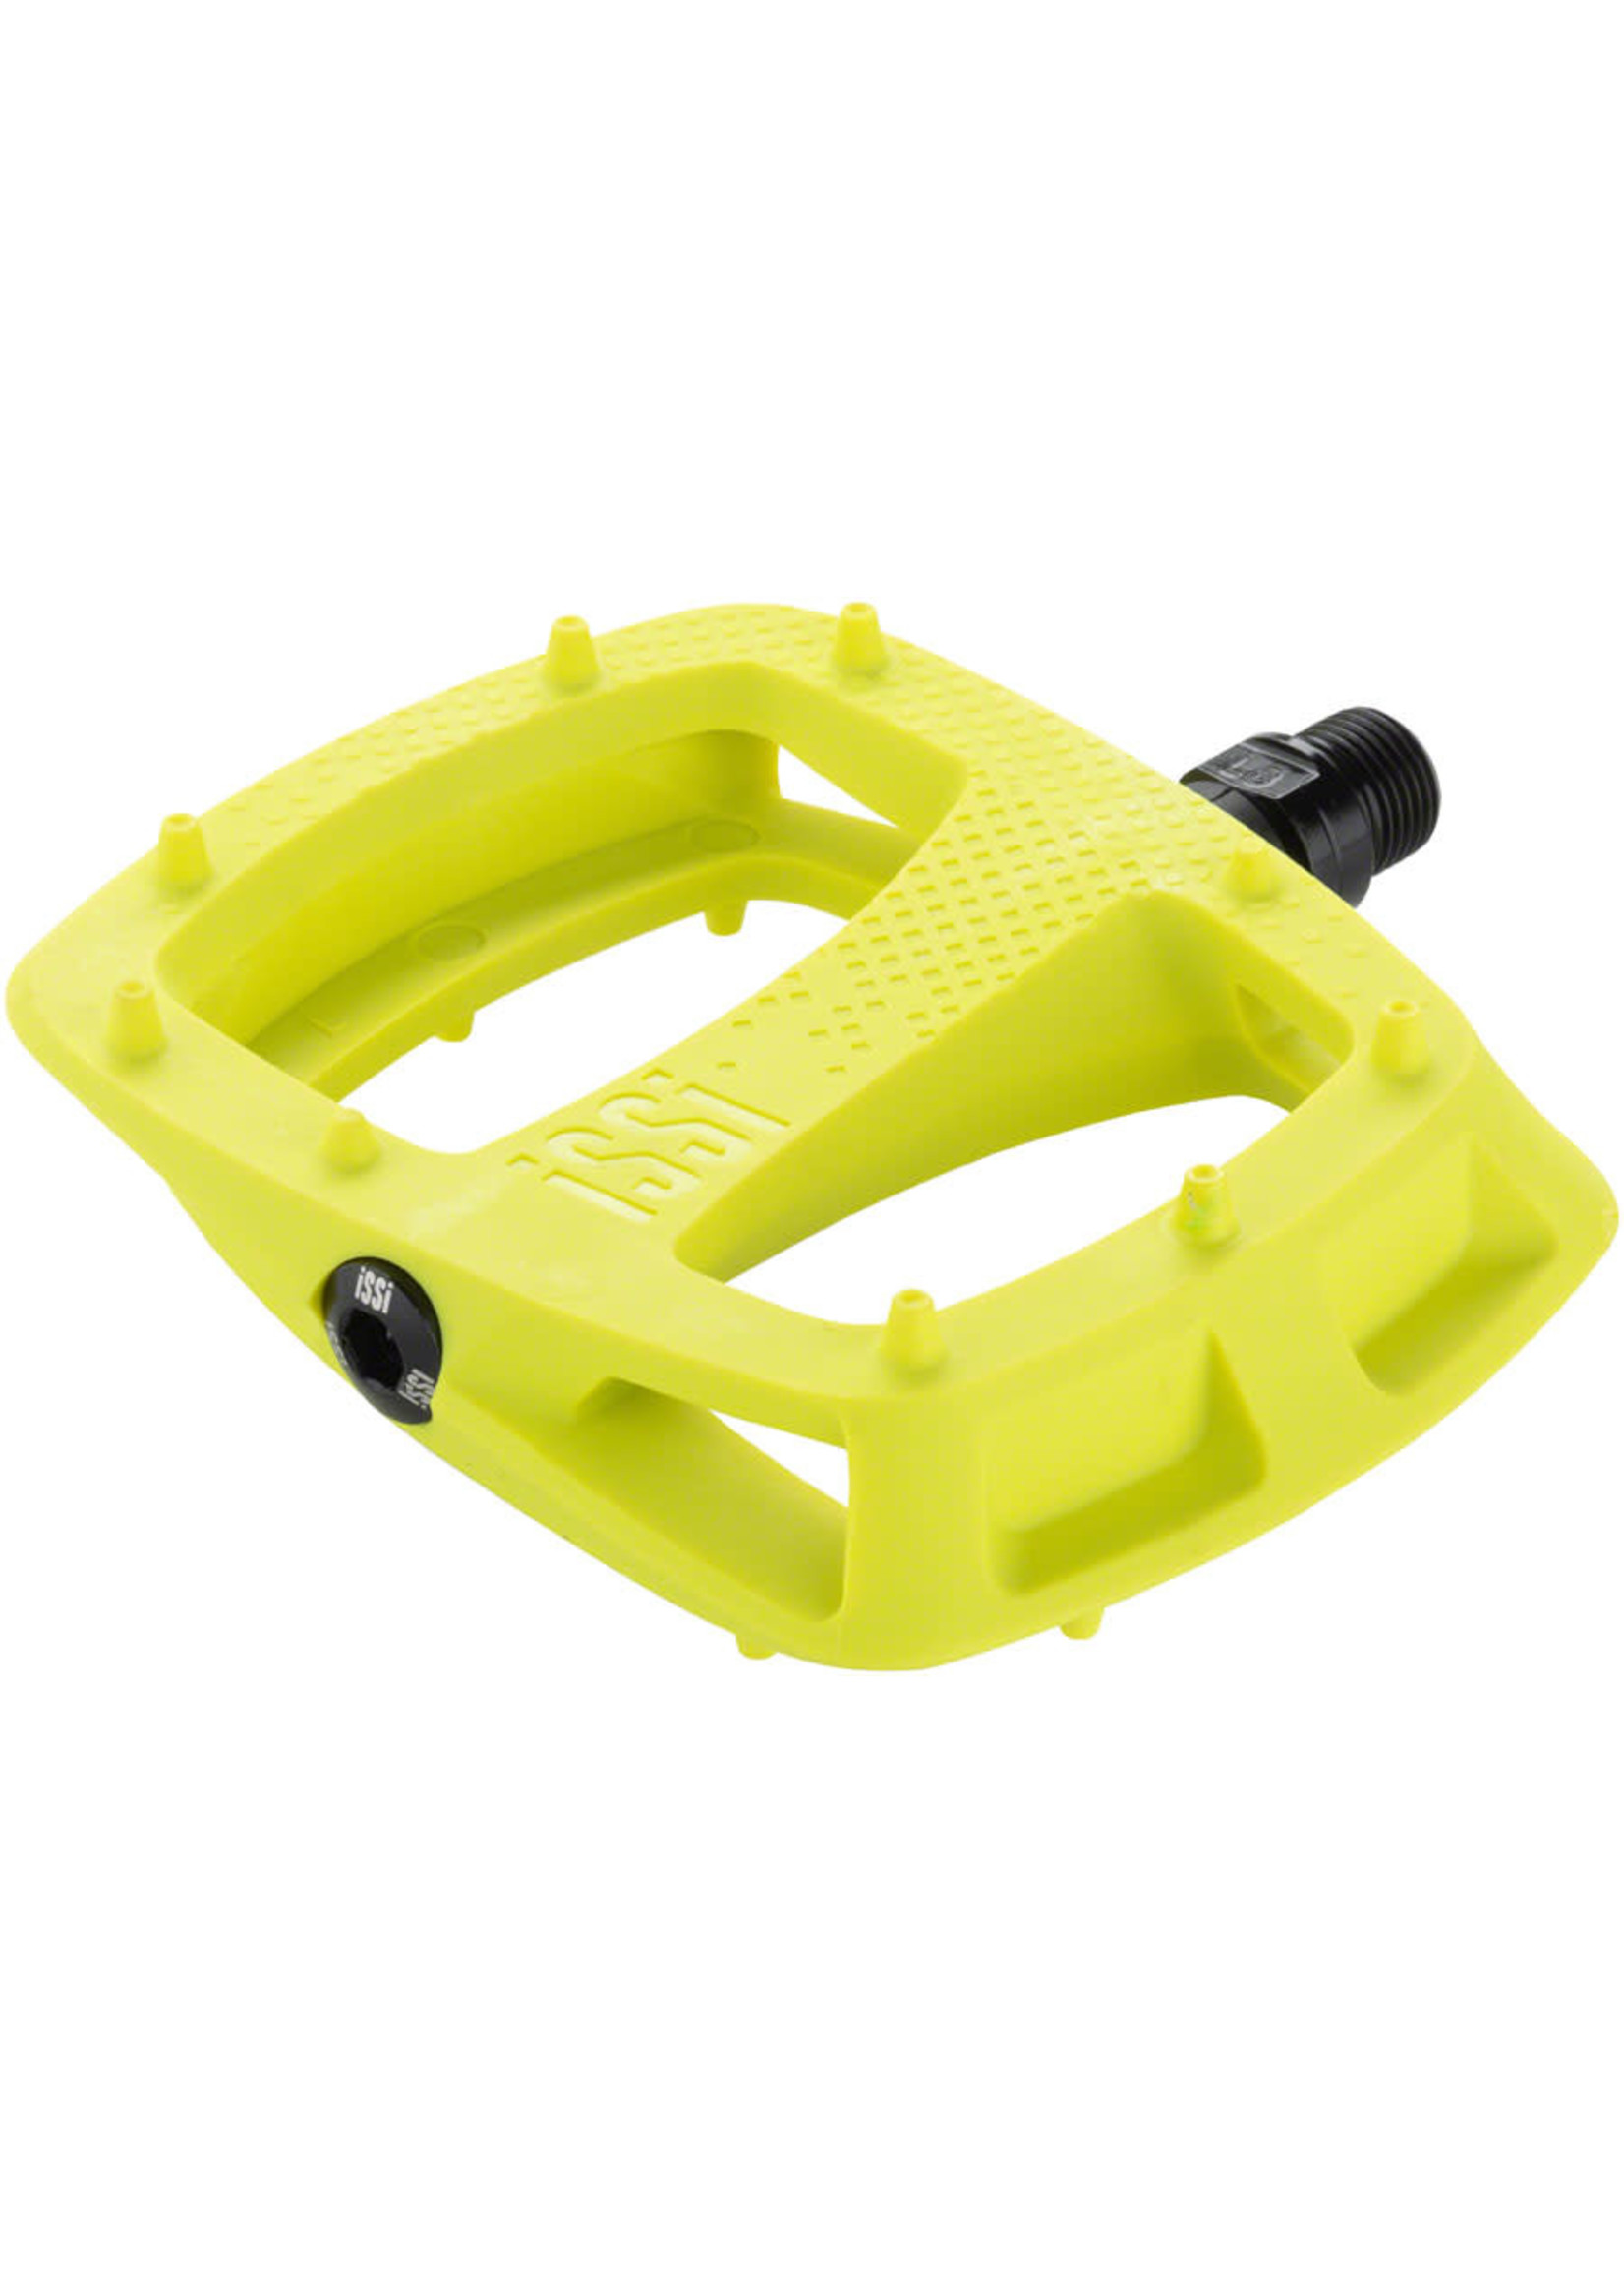 MSW iSSi Thump Pedals - Platform, Composite, 9/16", Yellow